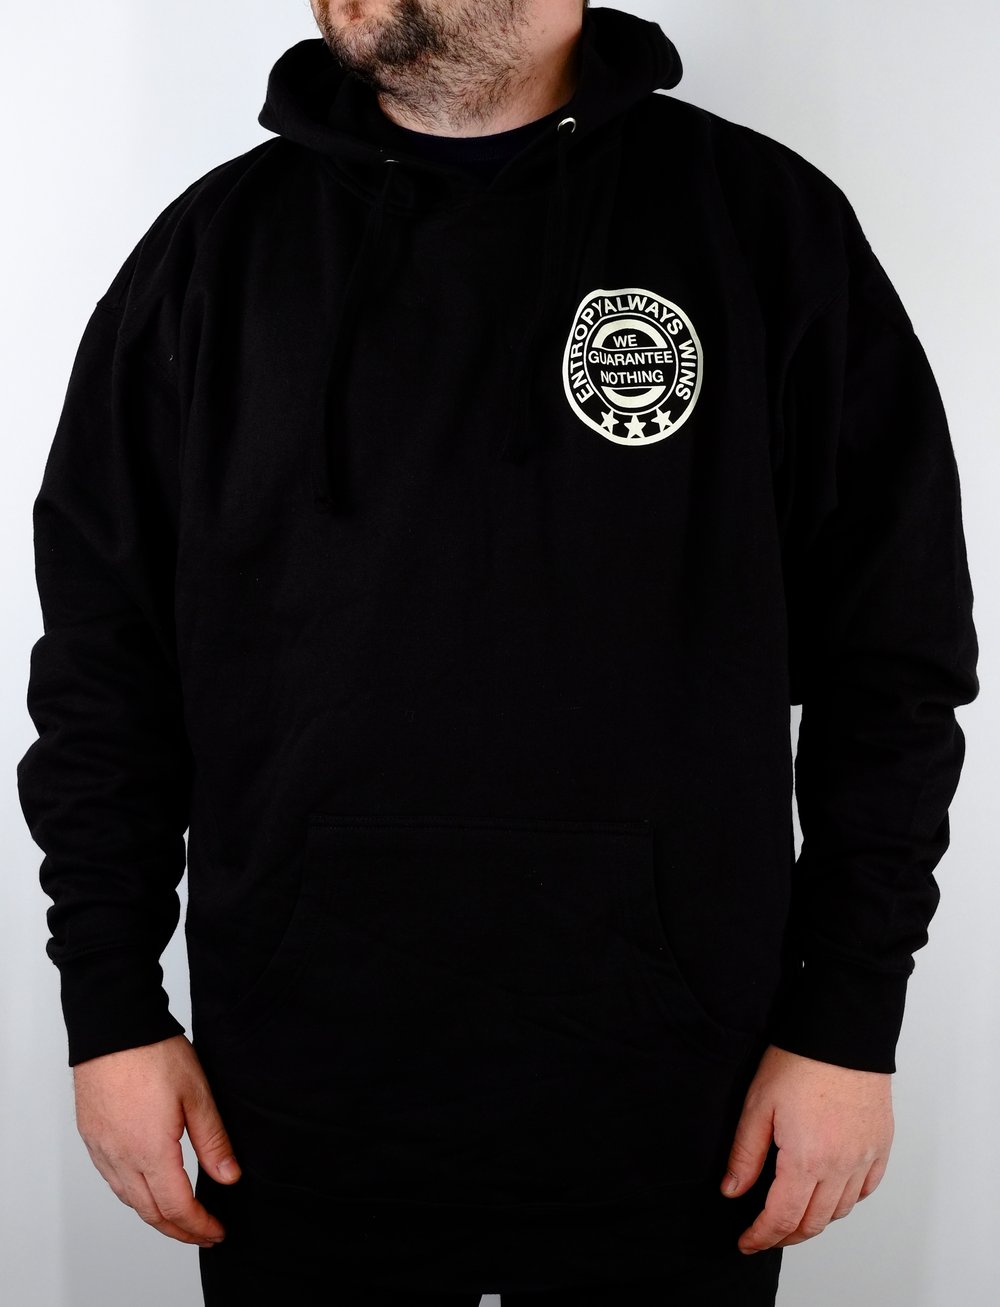 LIMITED QUANTITIES LEFT! Vintage Reaper Pullover Hoodie